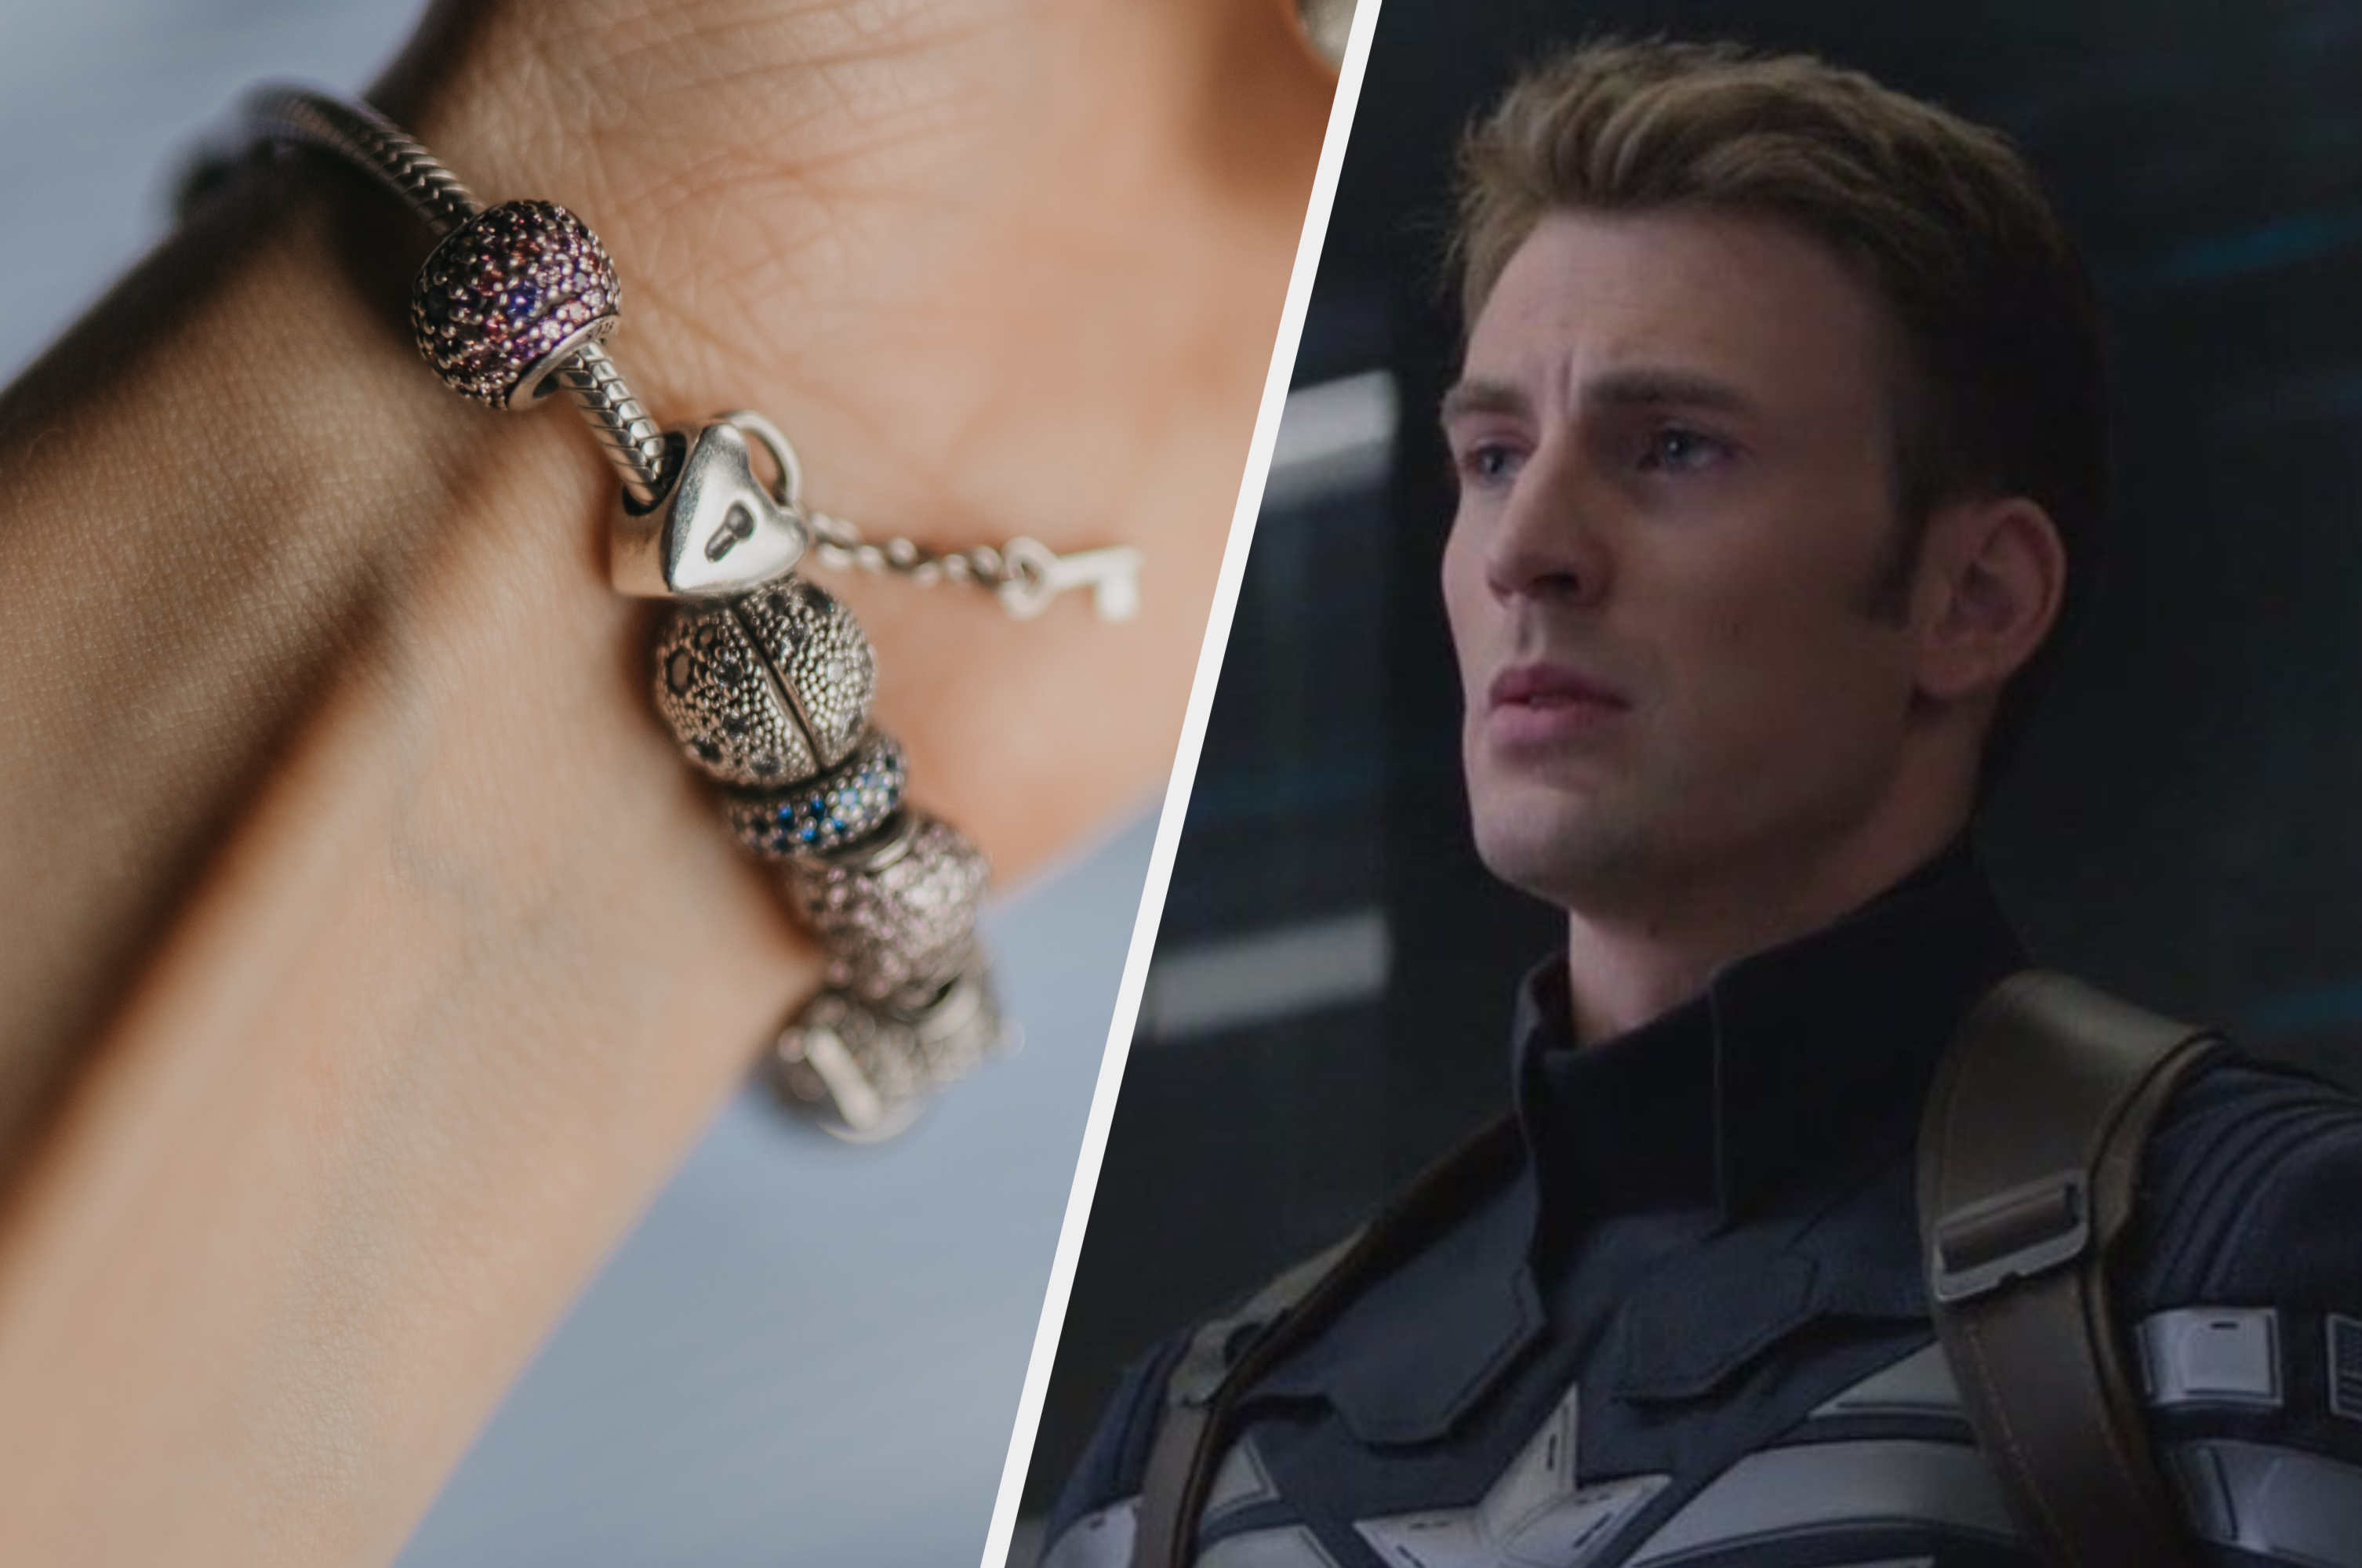 The Marvel x Pandora collection is here